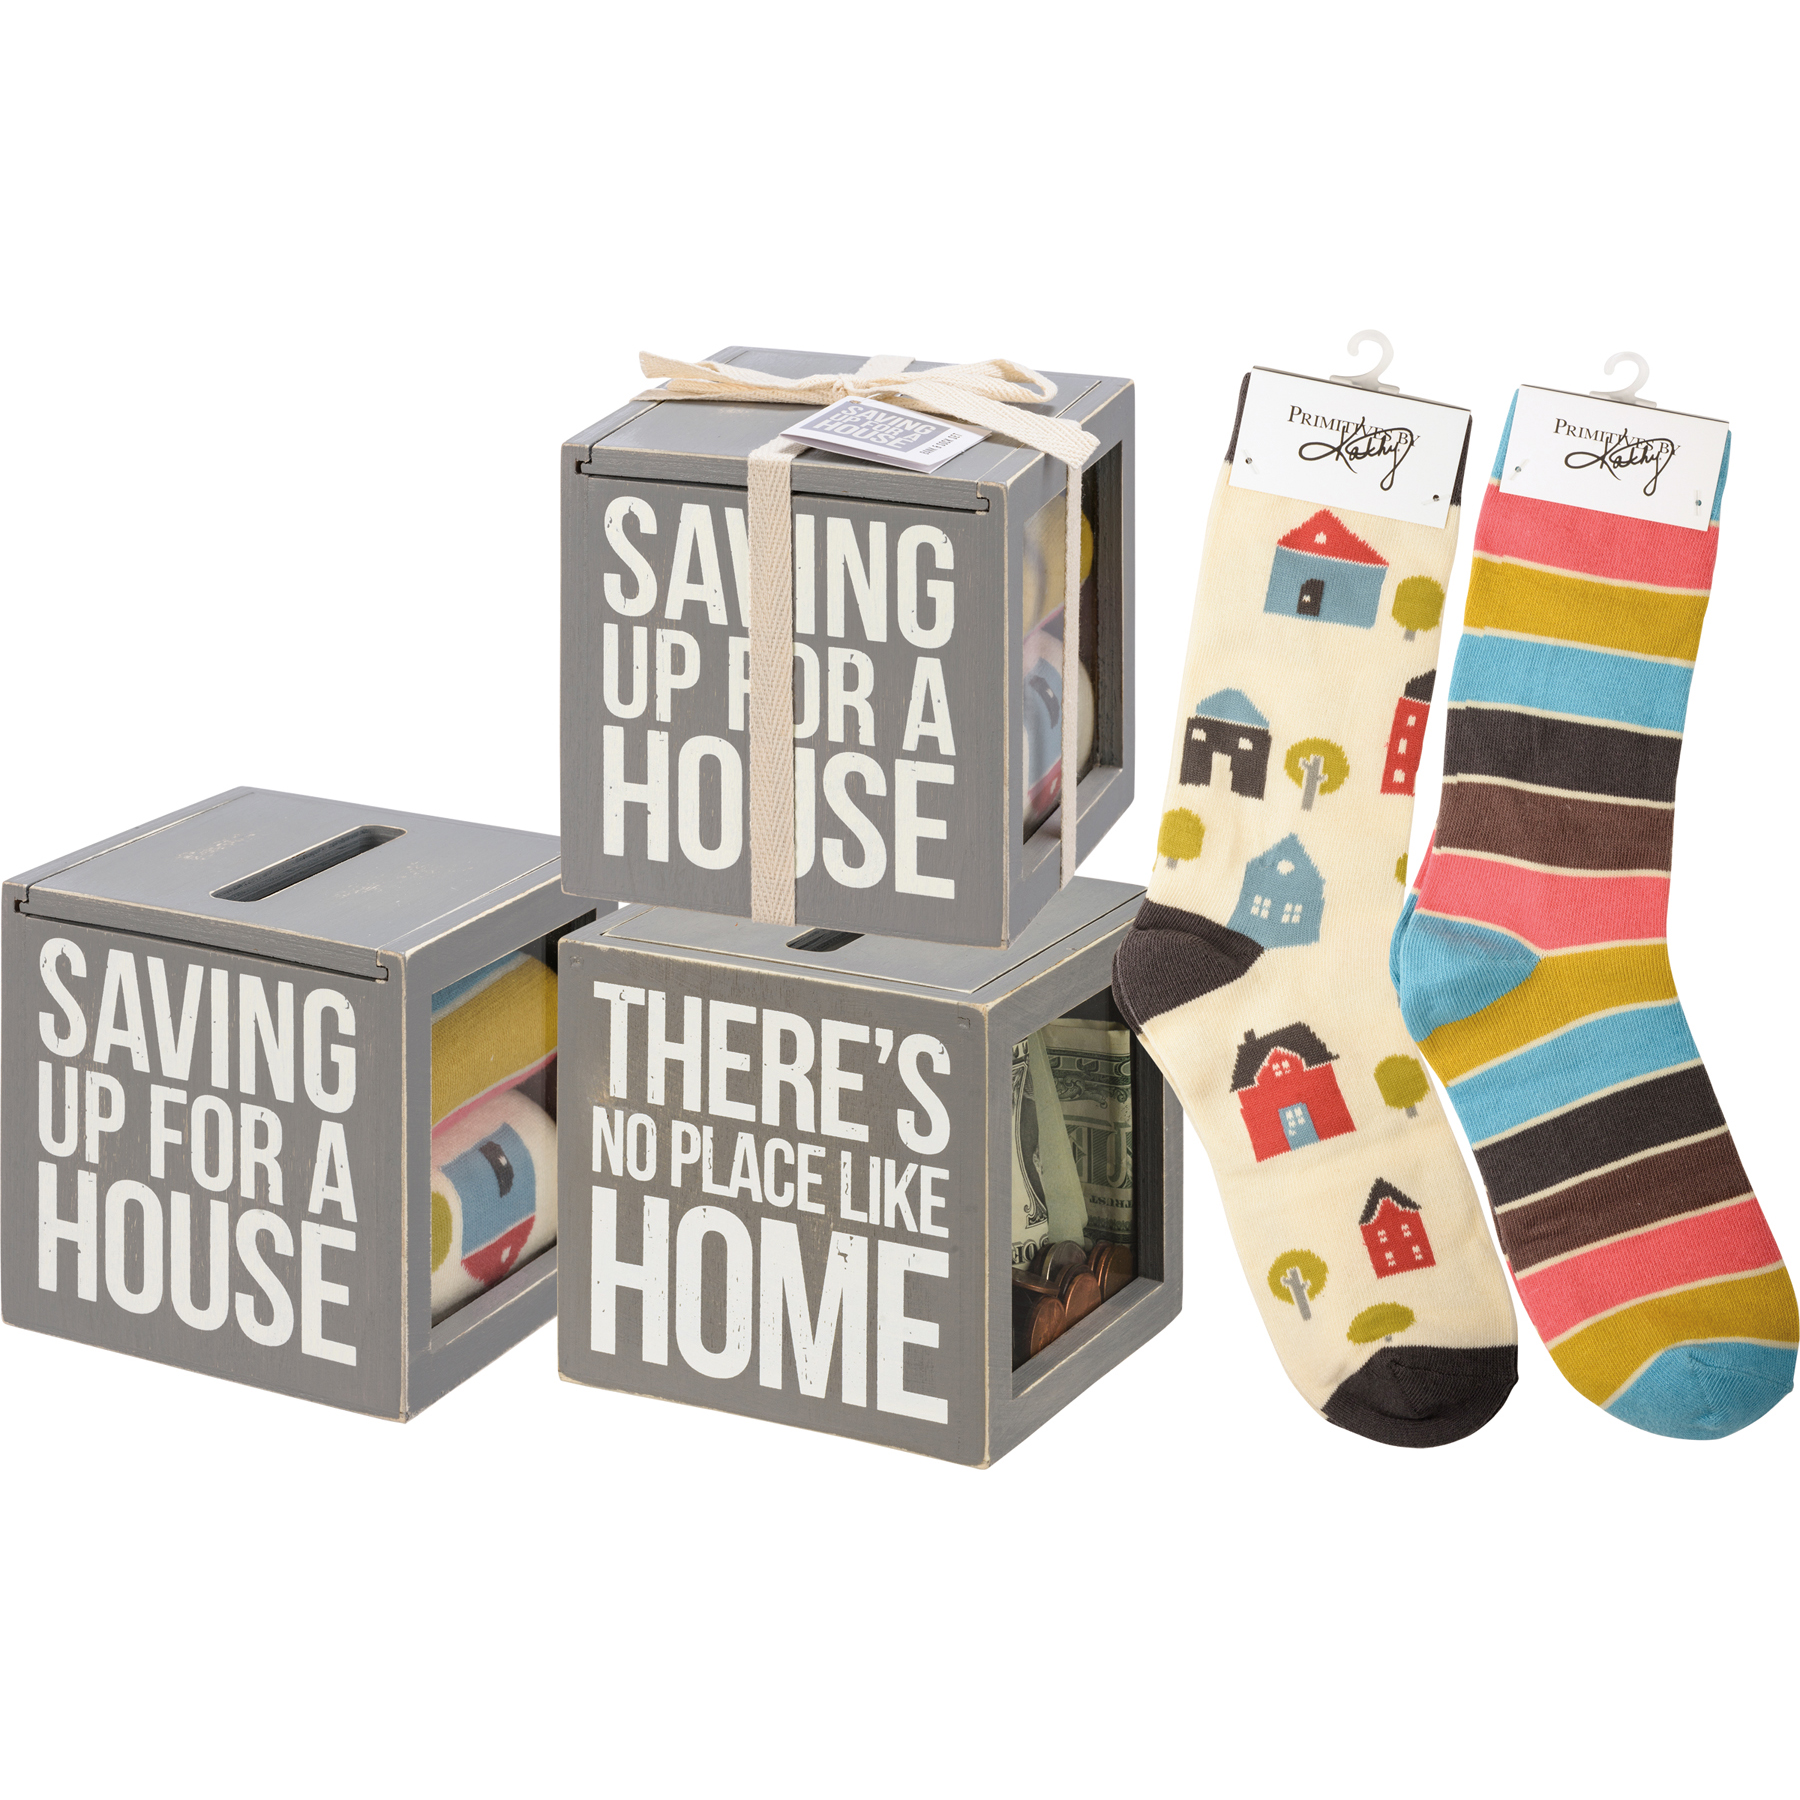 Bank And Sock Set Home, SKU: 111261
This coordinating set includes two pairs of socks with themed designs, tucked neatly inside a wooden bank featuring double-sided box sign style designs with Saving Up For A House and There's No Place Like Home sentiments. Sliding lid with convenient coin slot makes it easy to store coins and bills inside, and glass side panels allow you to watch as your savings grow. Socks are a cotton, nylon, and spandex blend and are machine-washable. Remove socks from bank and use it to stash your savings for your next big purchase!

DETAILS
Dimensions: Bank: 4.25 x 4.25 x 4.25, Socks: One Size Fits Most
Material: Wood, Glass, Cotton, Nylon, Spandex, Ribbon
UPC: 190134112615
Artist: Primitives by Kathy
Product Text: SAVING UP FOR A HOME; THERE'S NO PLACE LIKE HOME